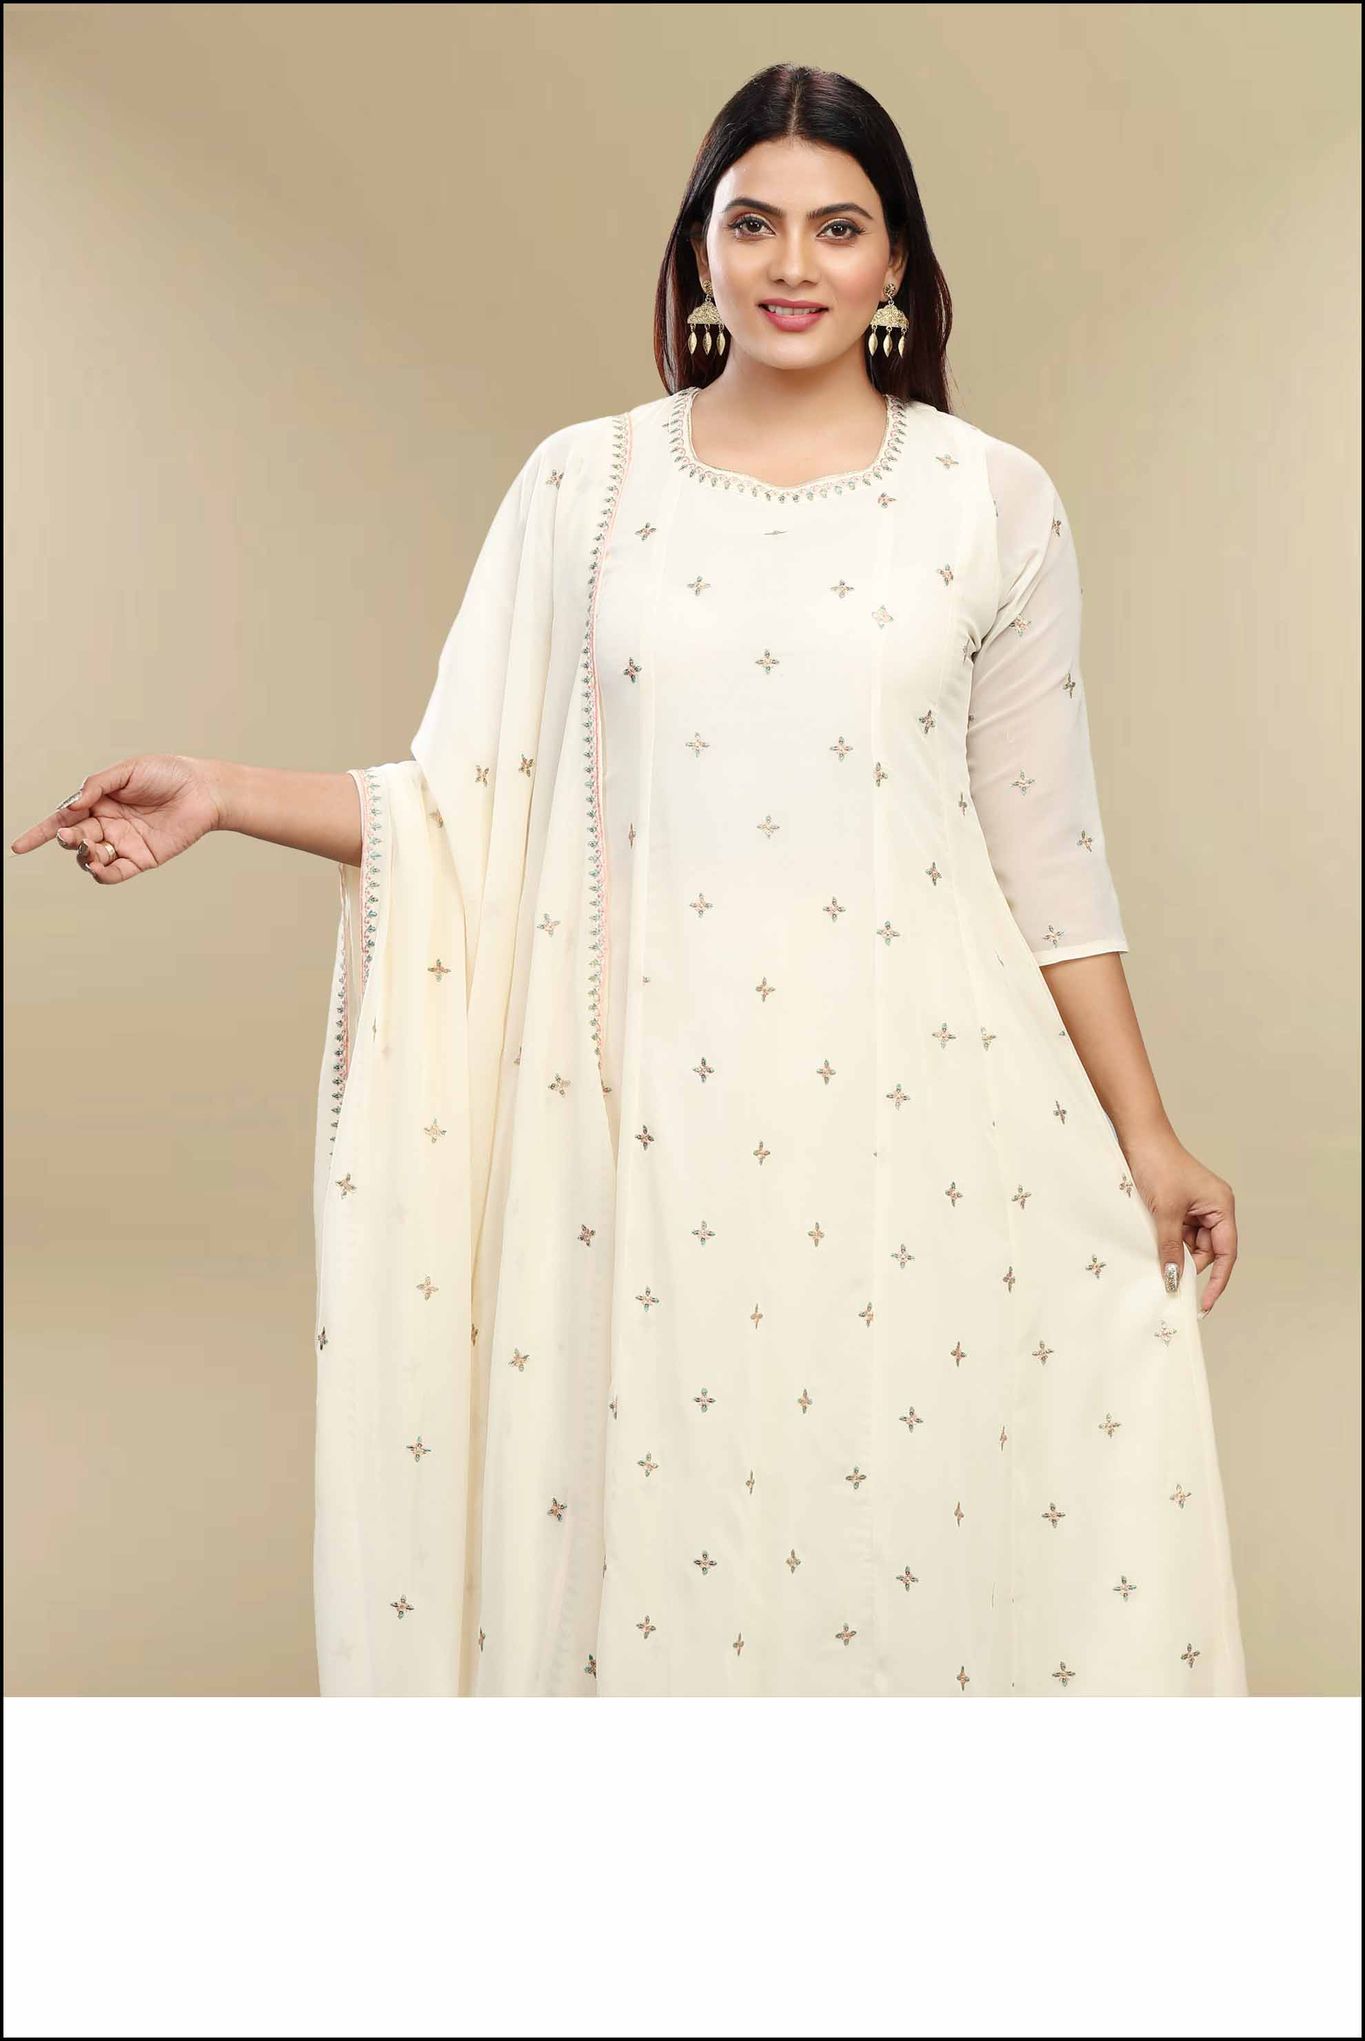 Stylish Kurtis for Girls and Women - Shop Online at Cougar